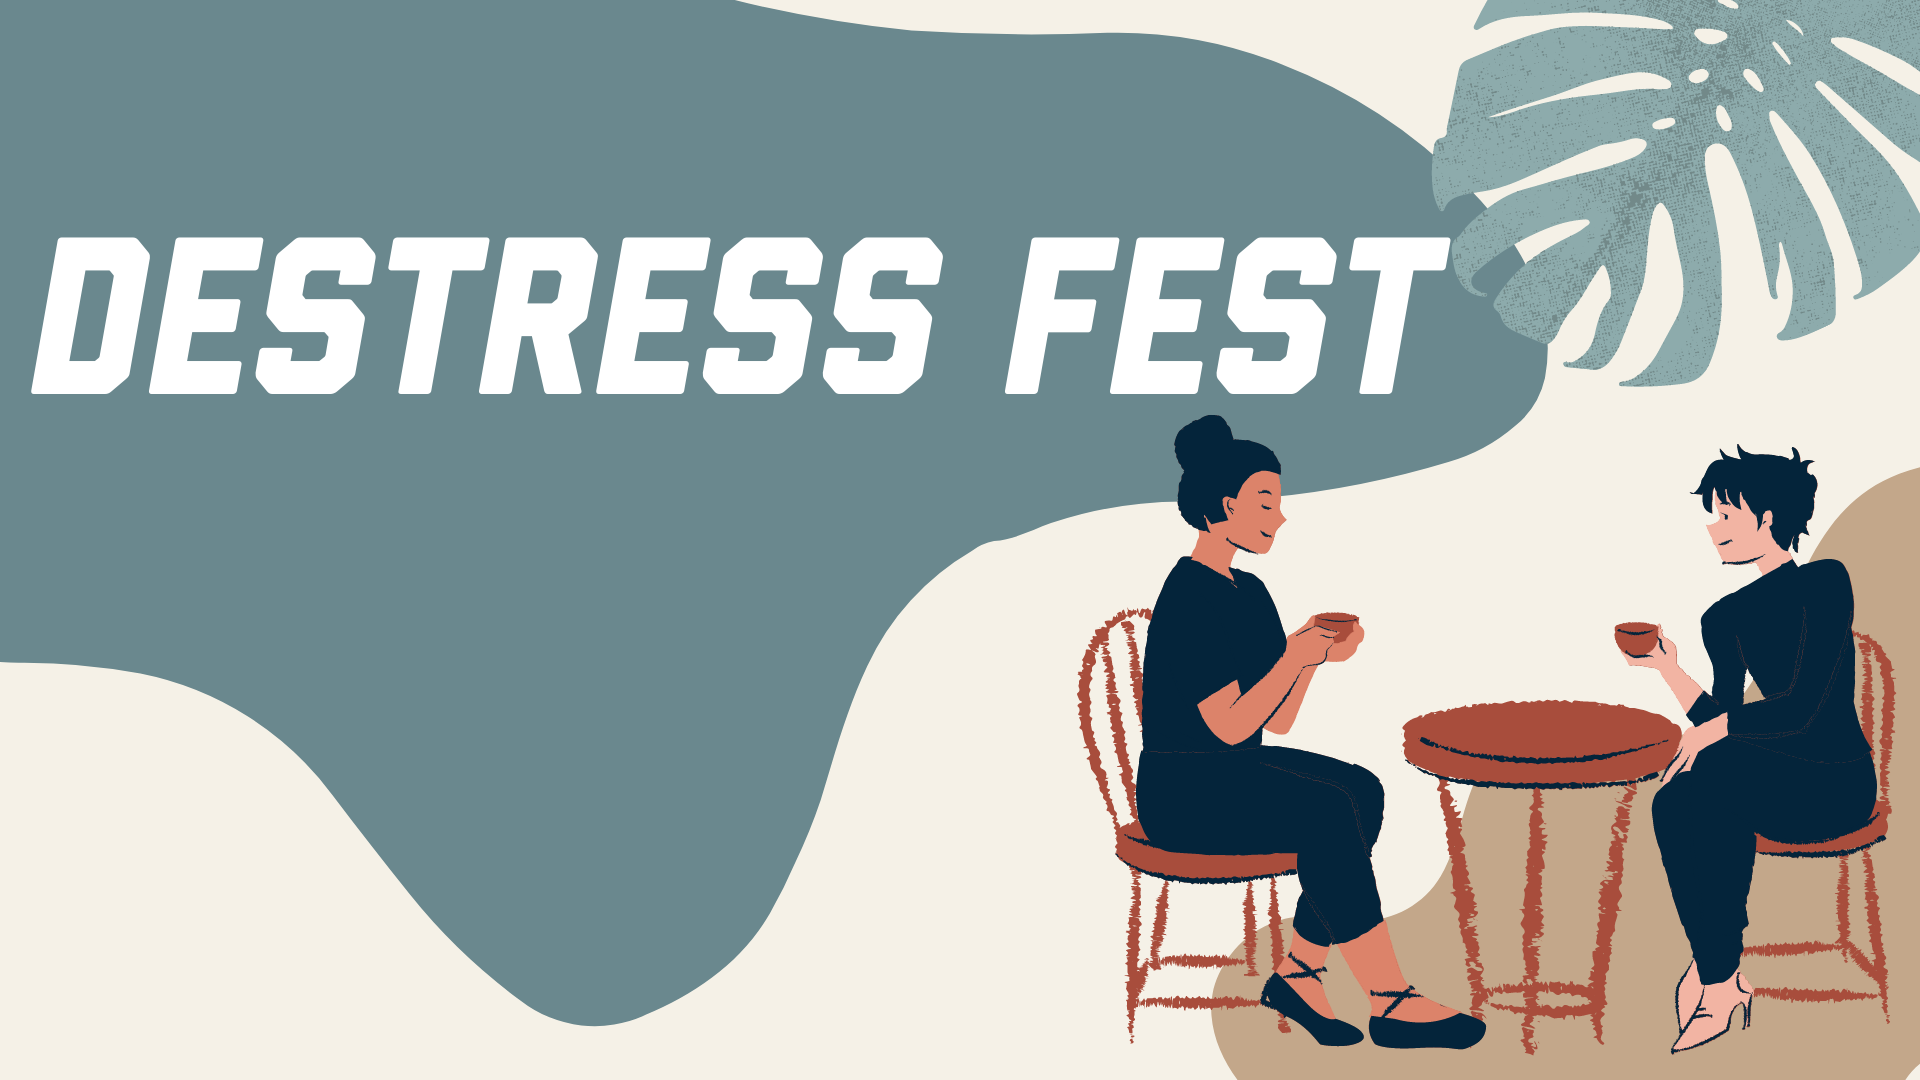 Check out this week's list of Destress Fest activities, aimed toward improving your self care during final exam week.